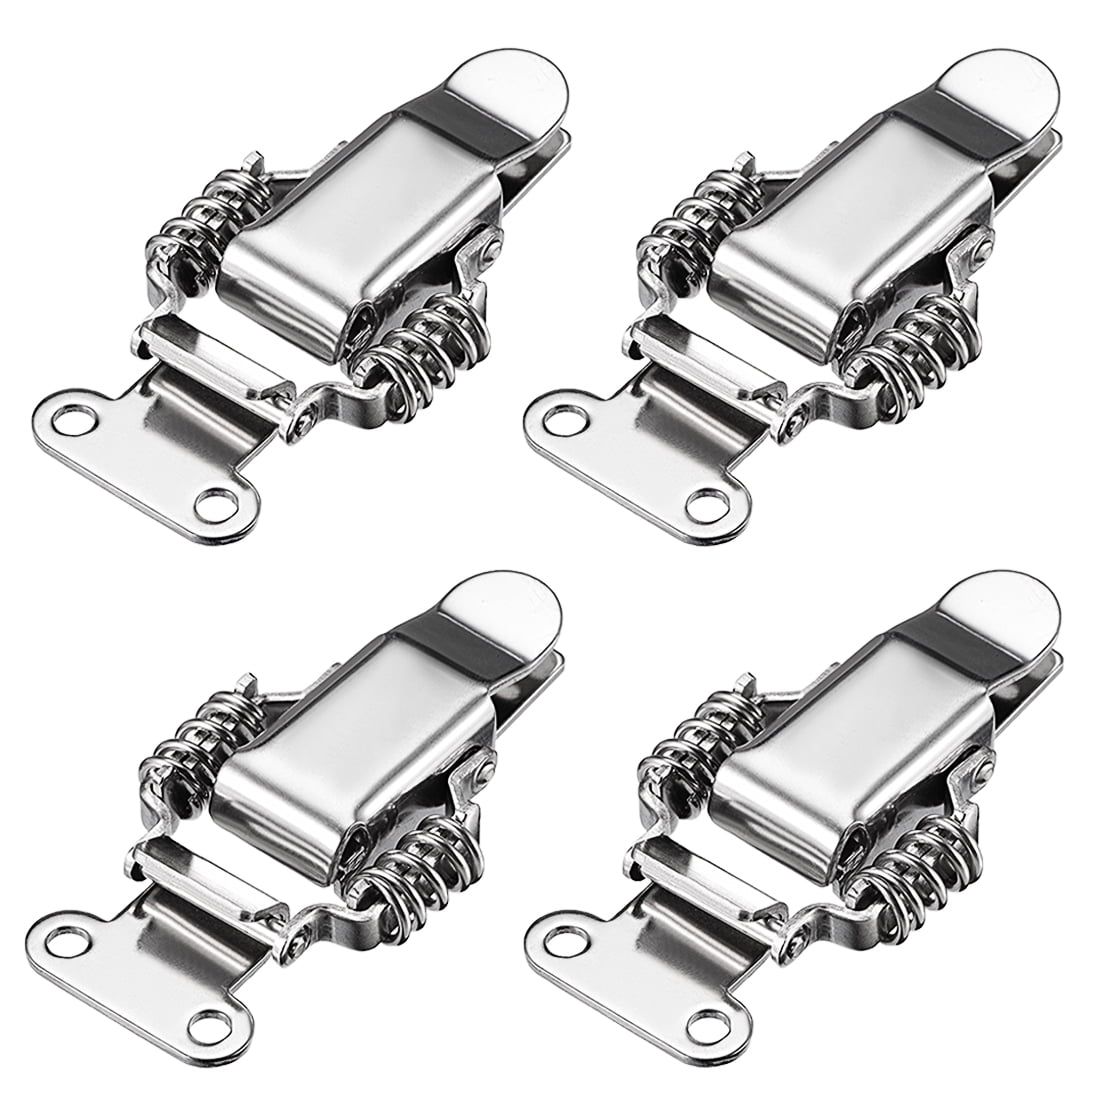 49mm Length 304 Stainless Steel Safety Clamps for Box Case Clamps Spring Lever Locks Package of 8 